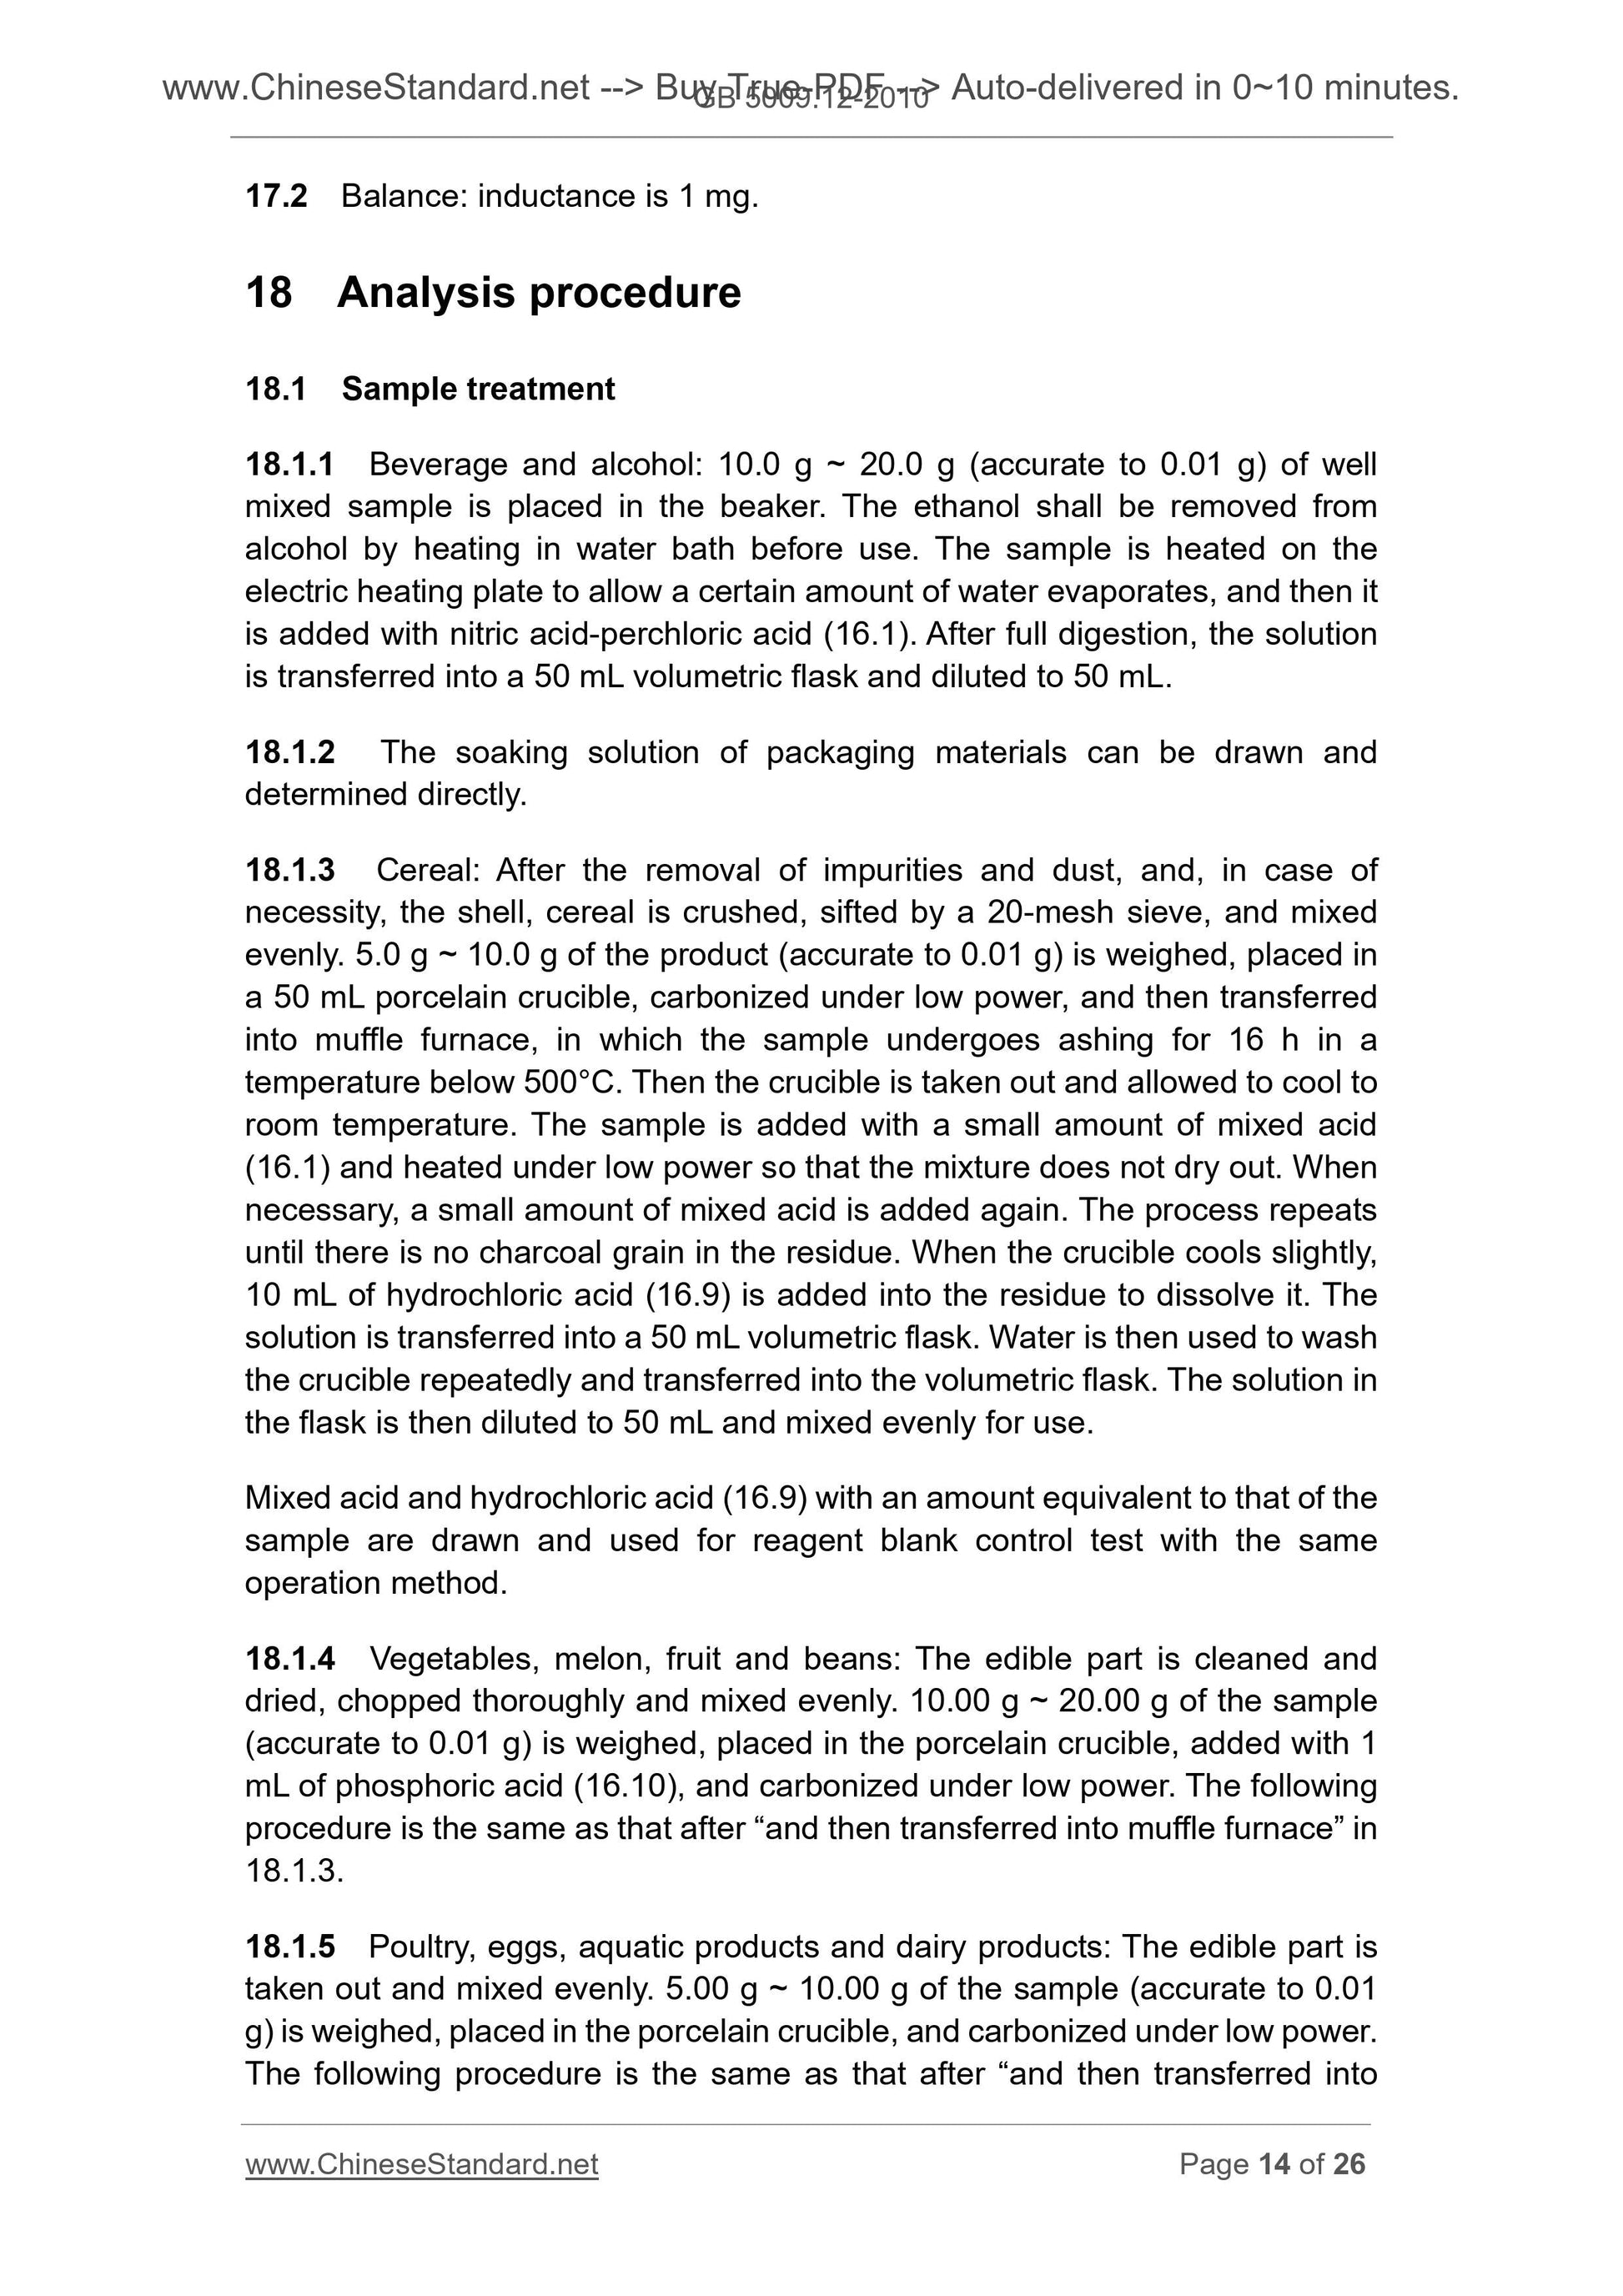 GB 5009.12-2010 Page 9